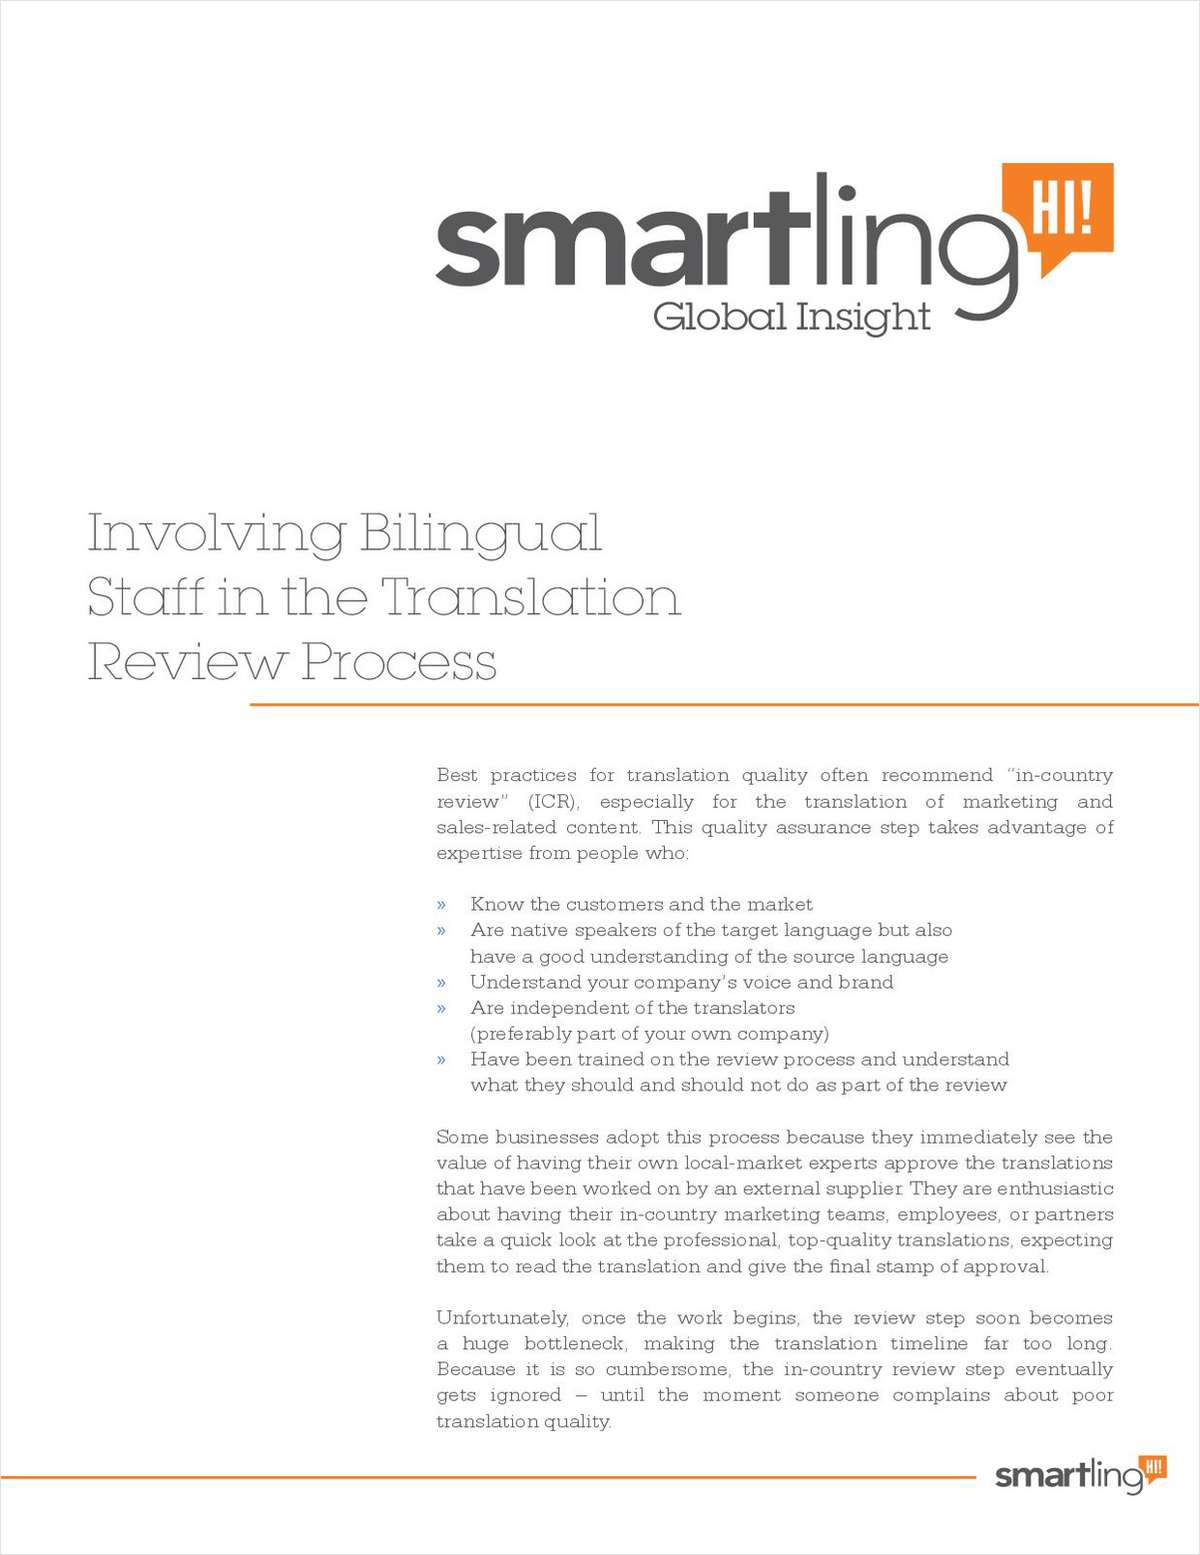 Involving Bilingual Staff in the Translation Review Process